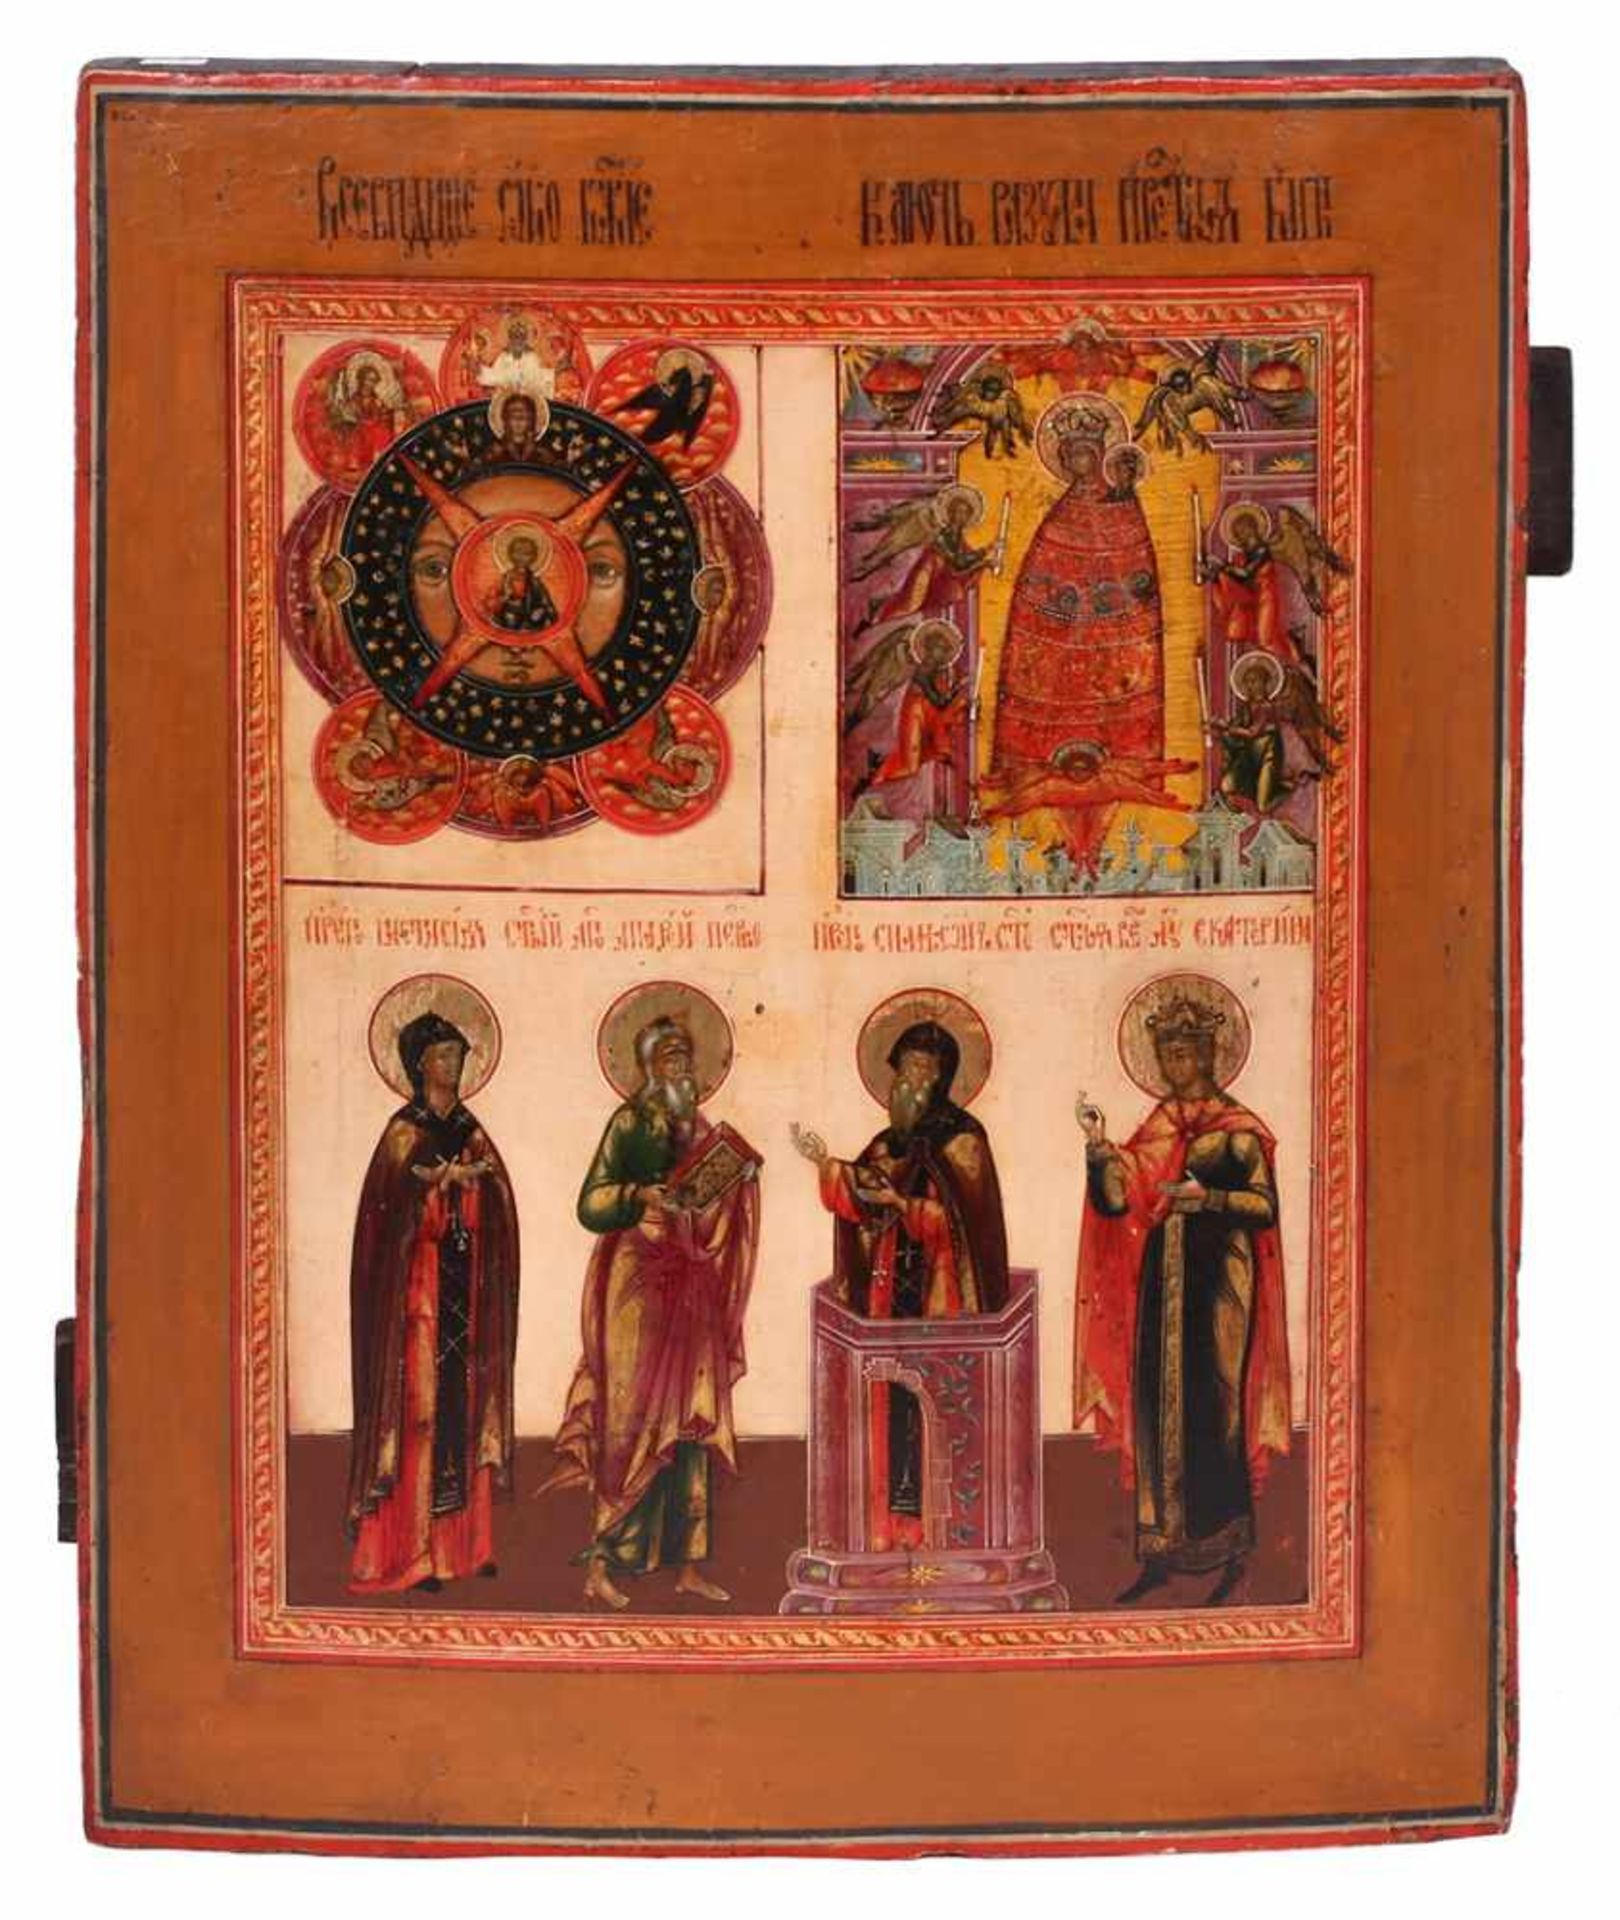 [A rare russian icon]. A three partite icon: "All-Seeing Eye of God", "Increase of reason", and